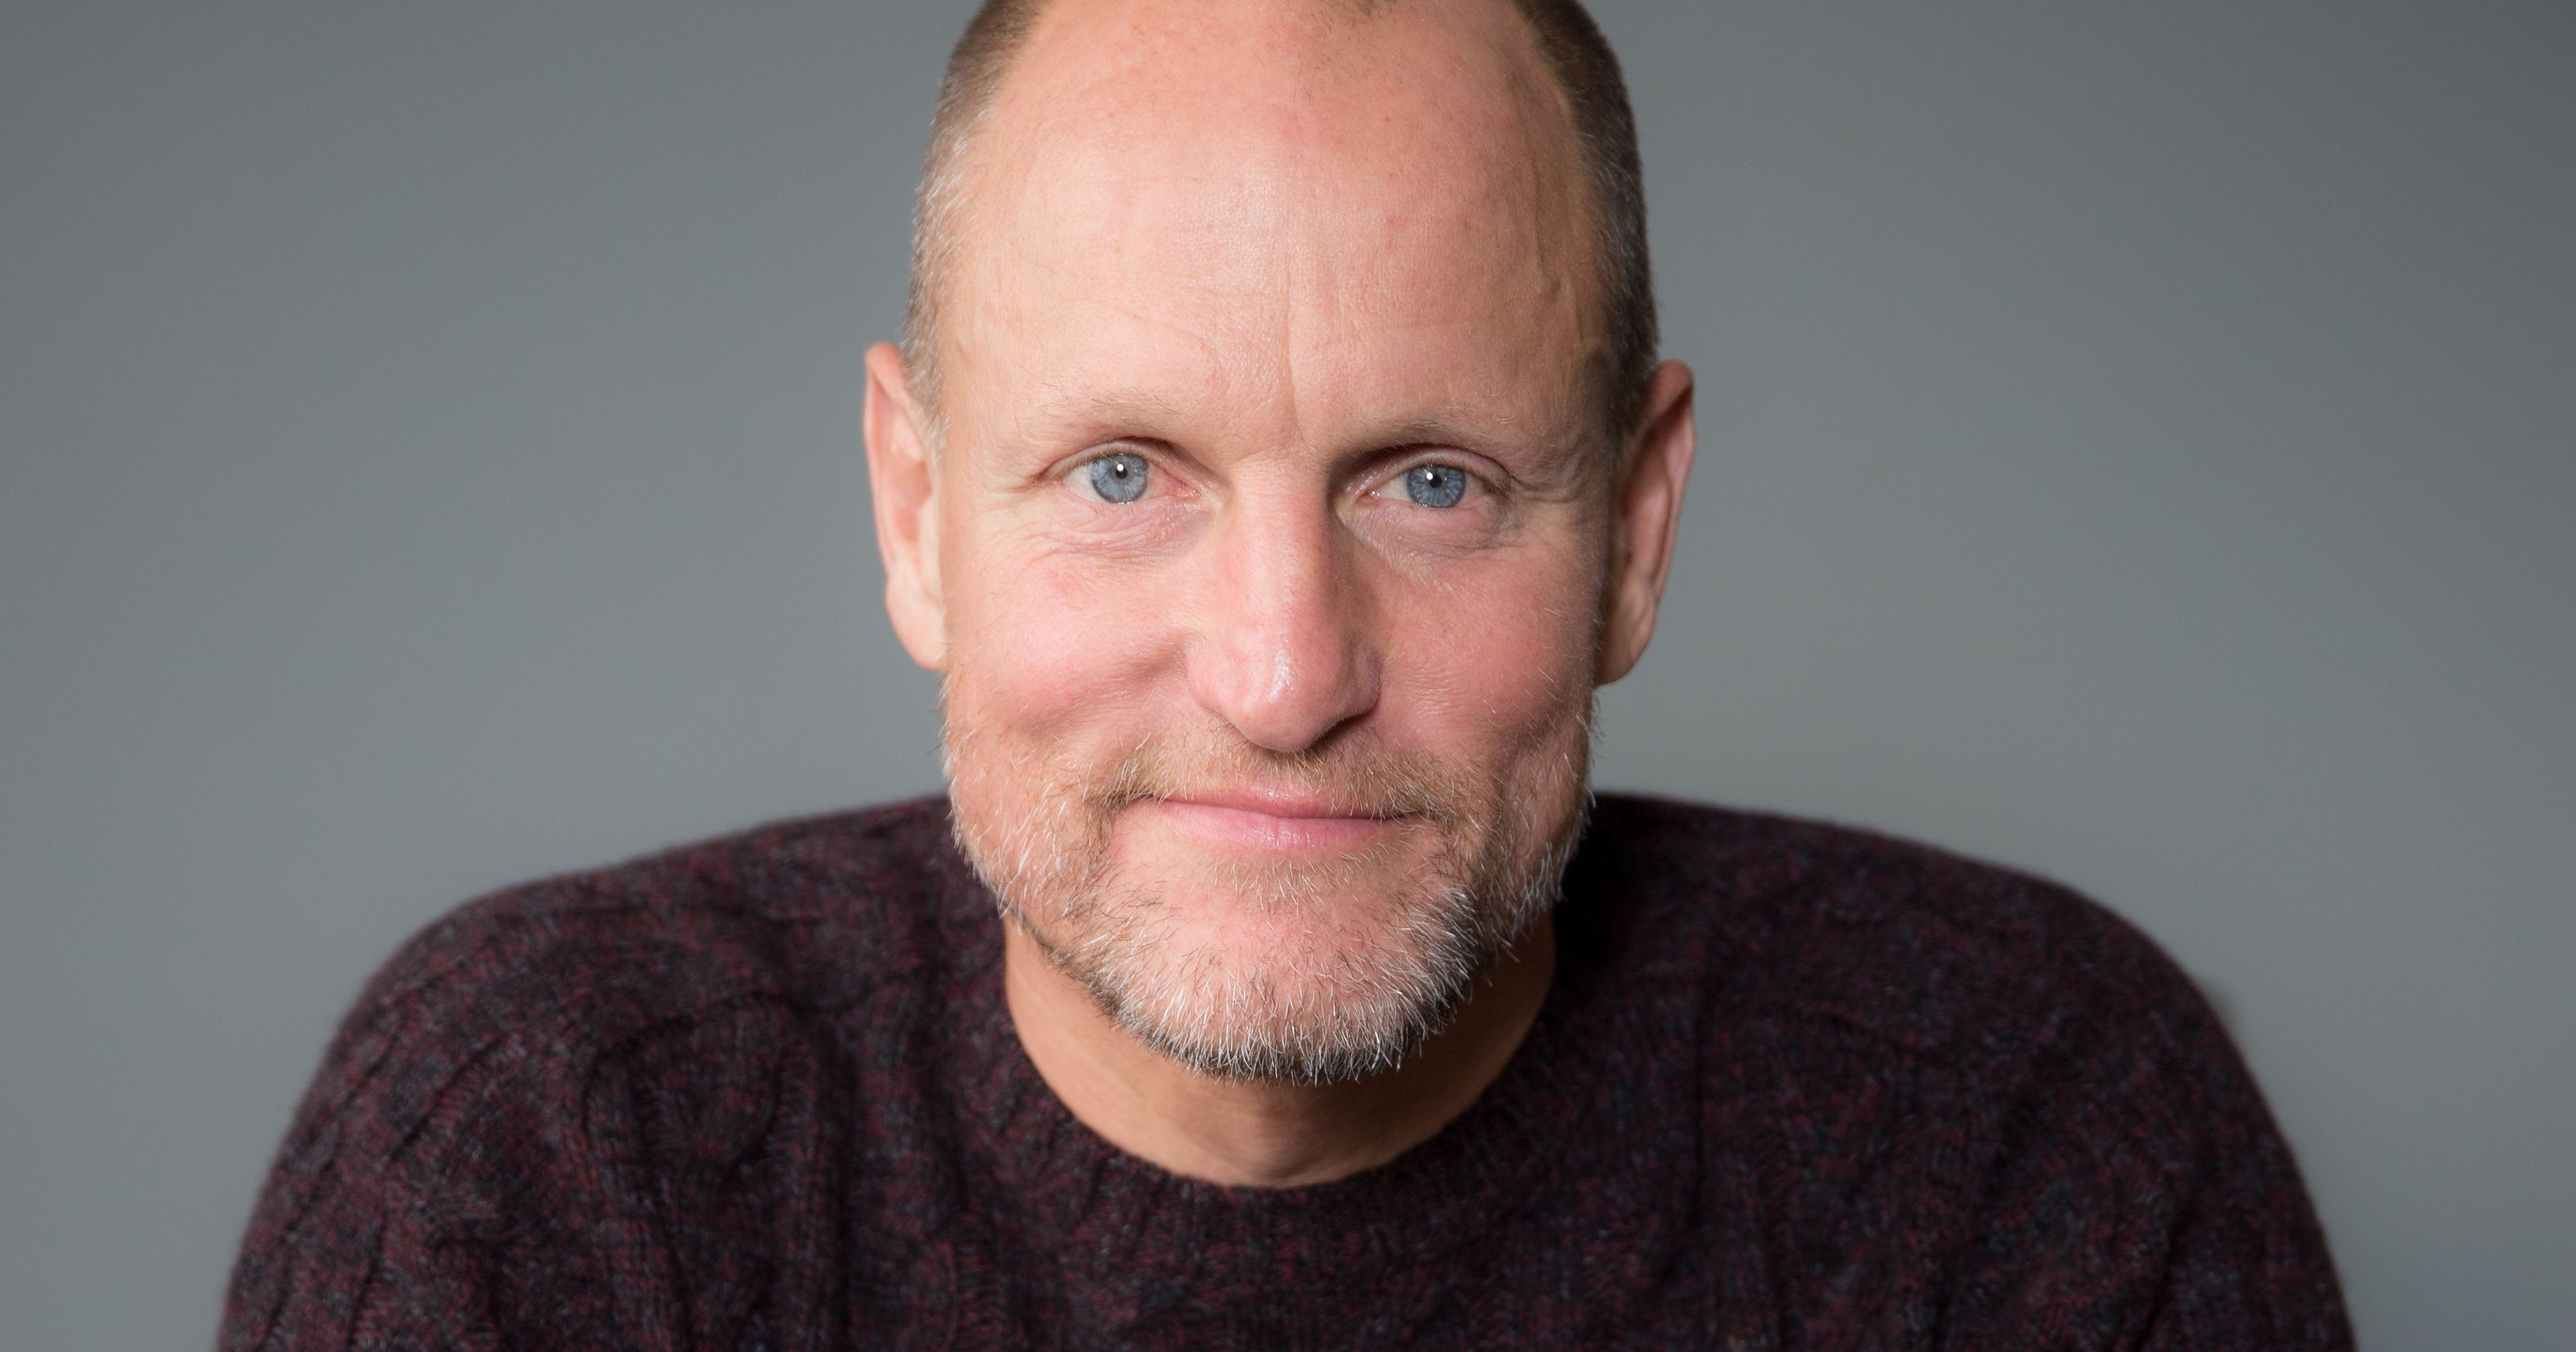 Woody Harrelson - Was arrested in 1982 while dancing in the streets like a madman, the only problem was that he resisted the officers, which increased his sentenced. He was arrested again in 1996 for growing hemp plants in his home. 
